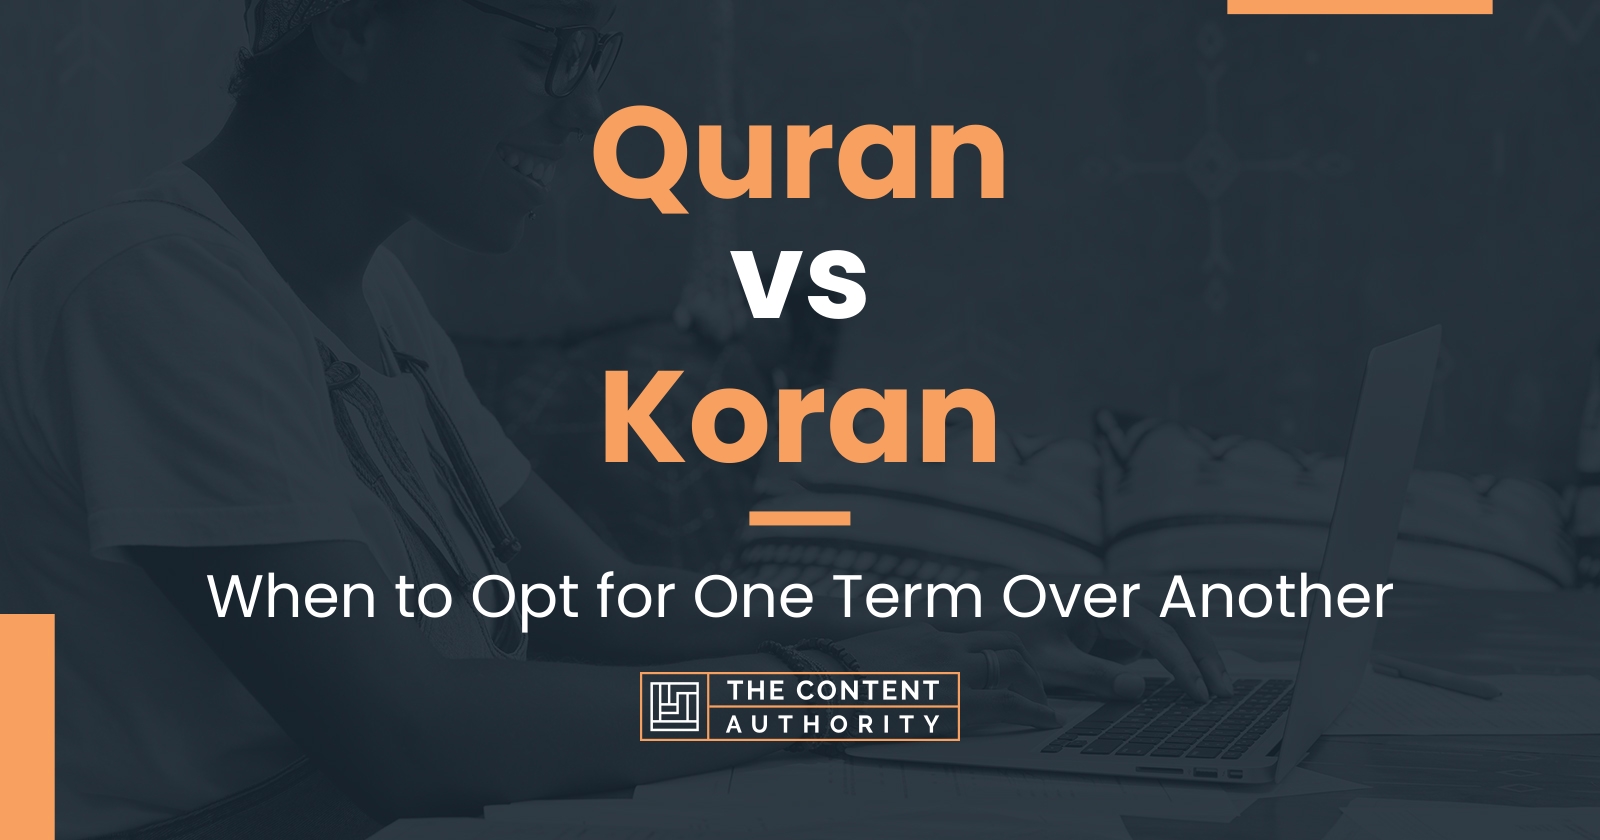 Quran Vs Koran When To Opt For One Term Over Another